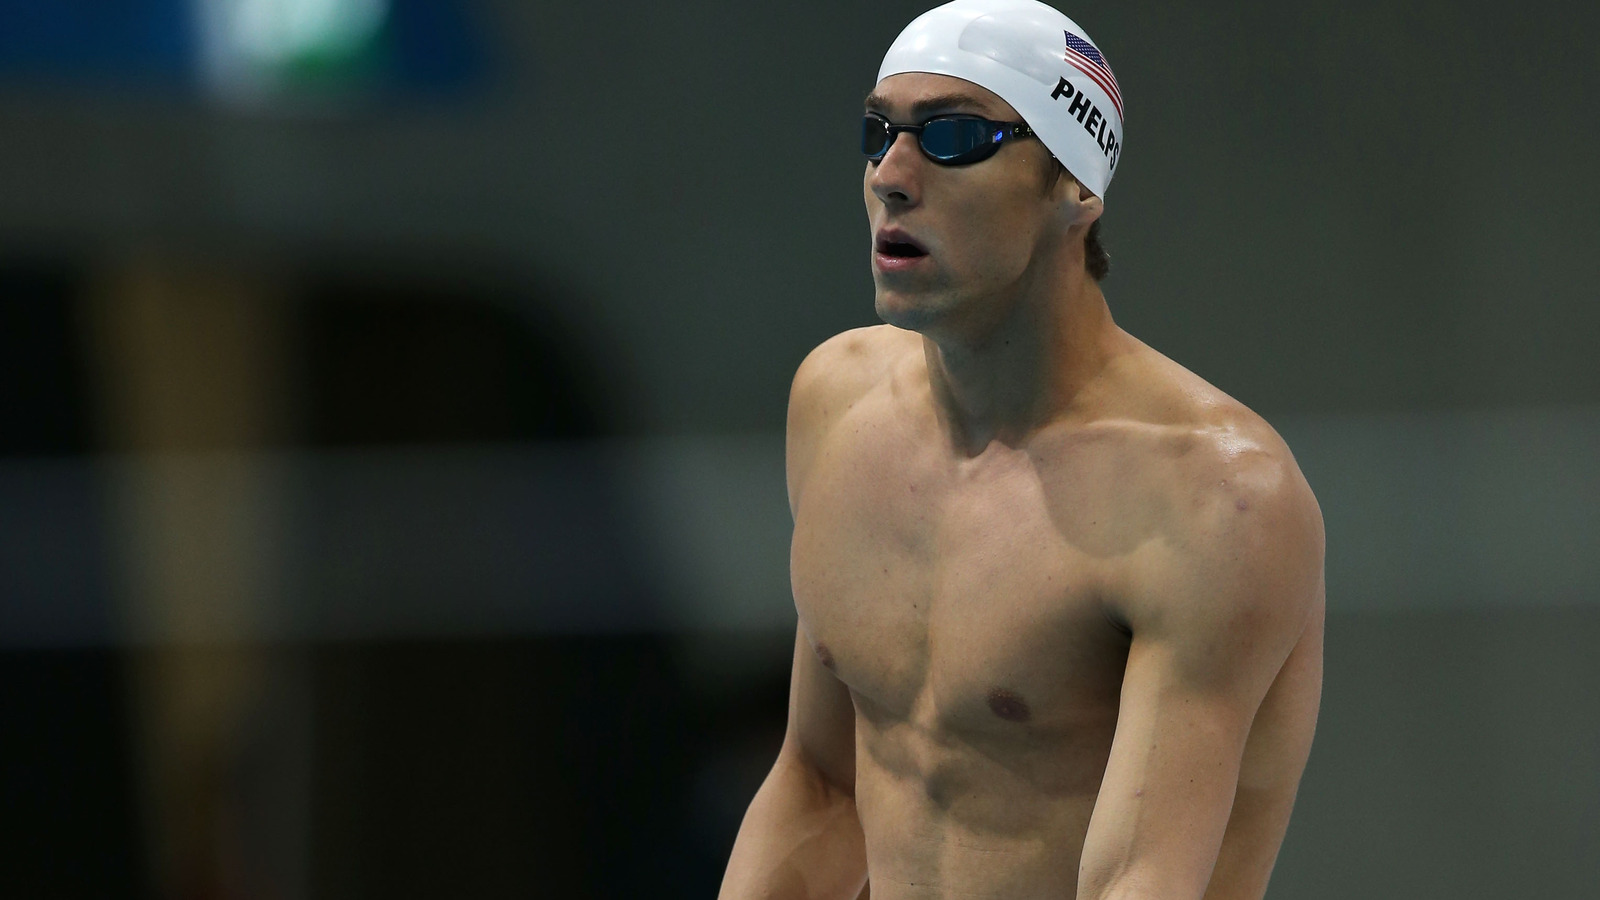 The Real Reason Olympic Swimmers Slap Themselves Before A Race